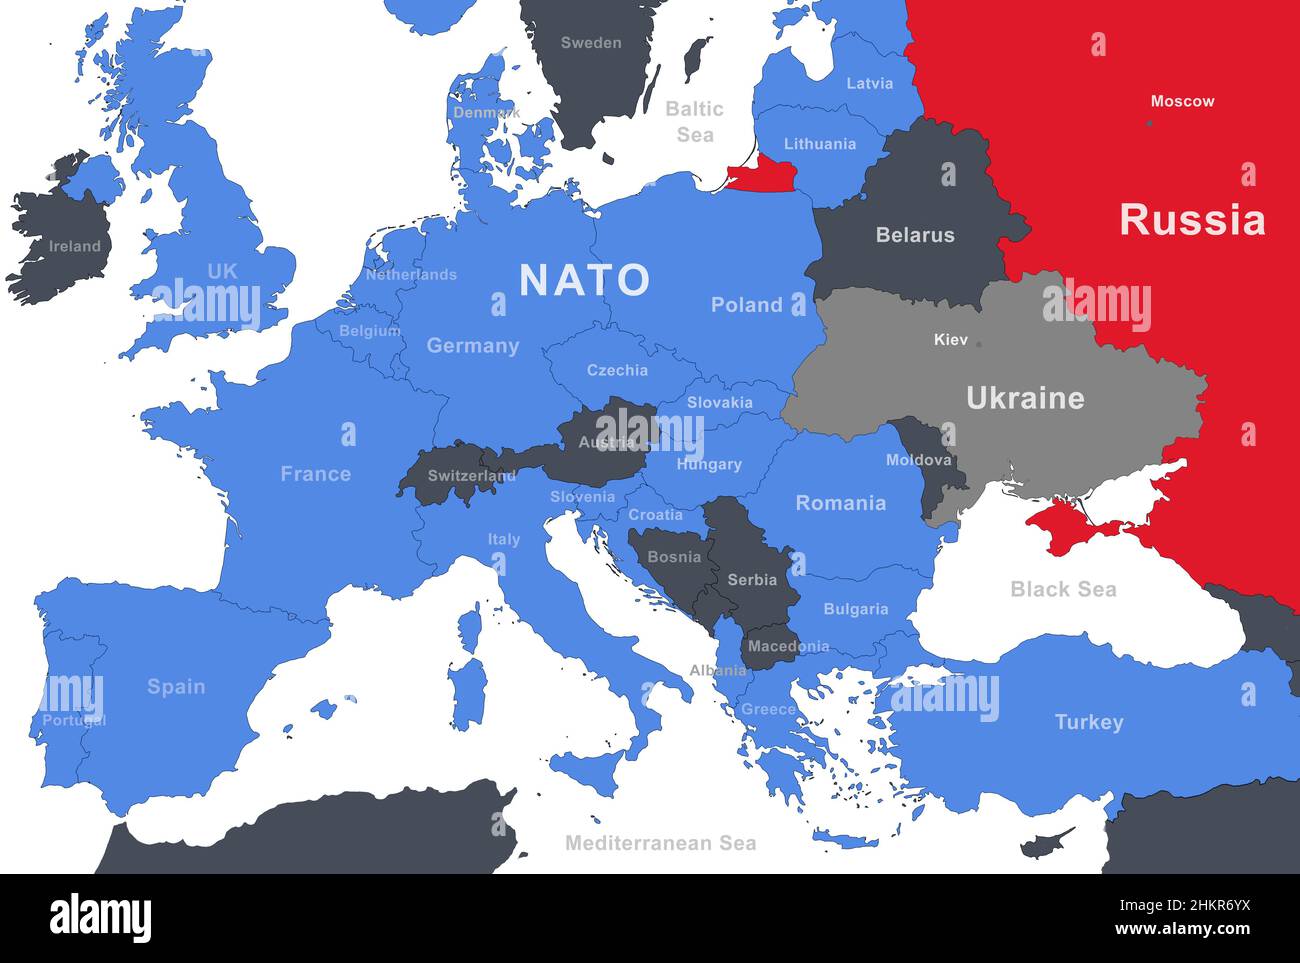 Russia, NATO and Ukraine on Europe outline map. Russian border on military-political map with Belarus, Poland, Germany, Turkey and other countries. Ba Stock Photo